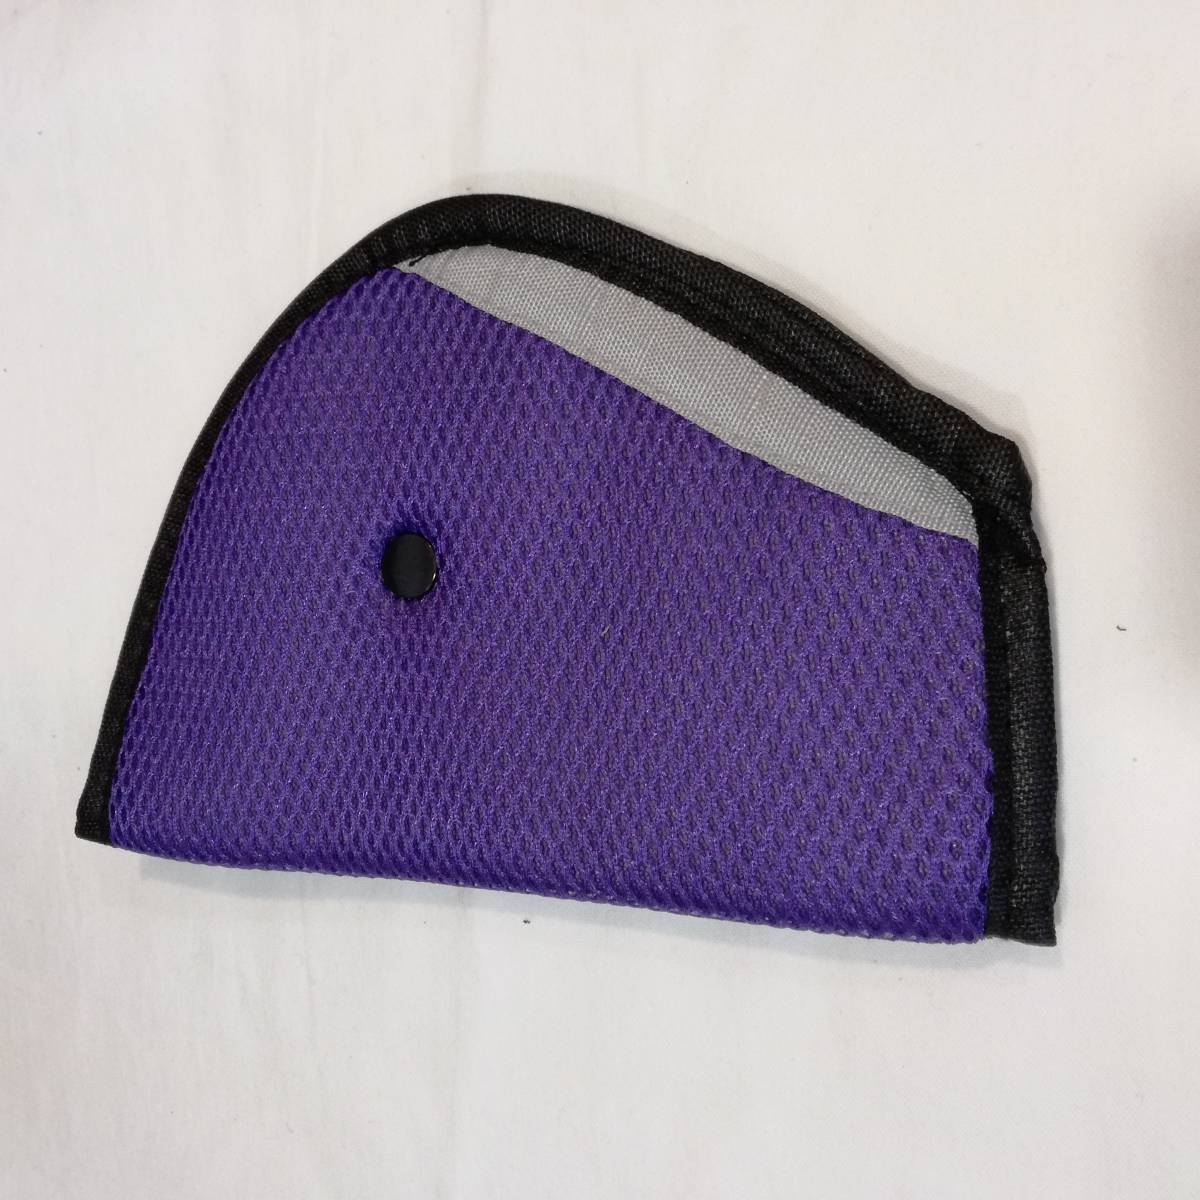  new goods seat belt pad purple supporter for children Kids cover safety belt anchor adjustment adjuster child seat free shipping 